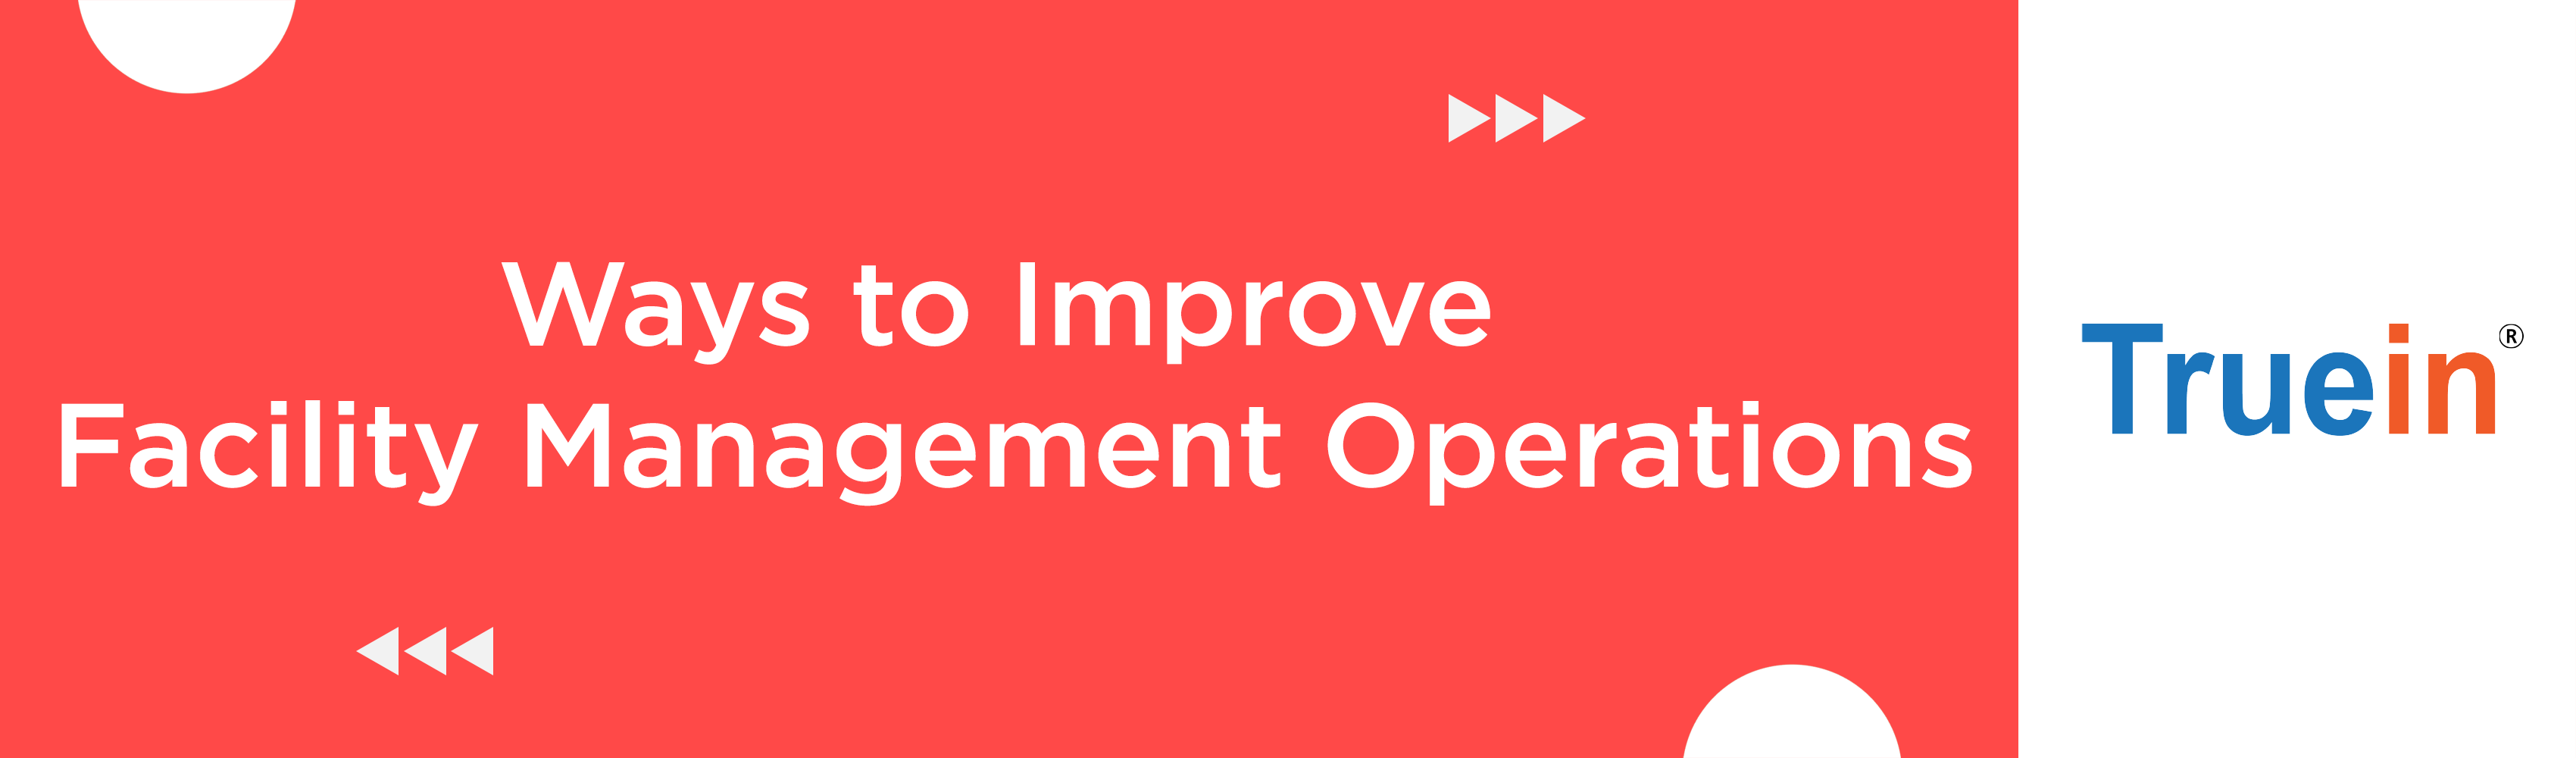 6 Ways to Improve Facility Management Operations